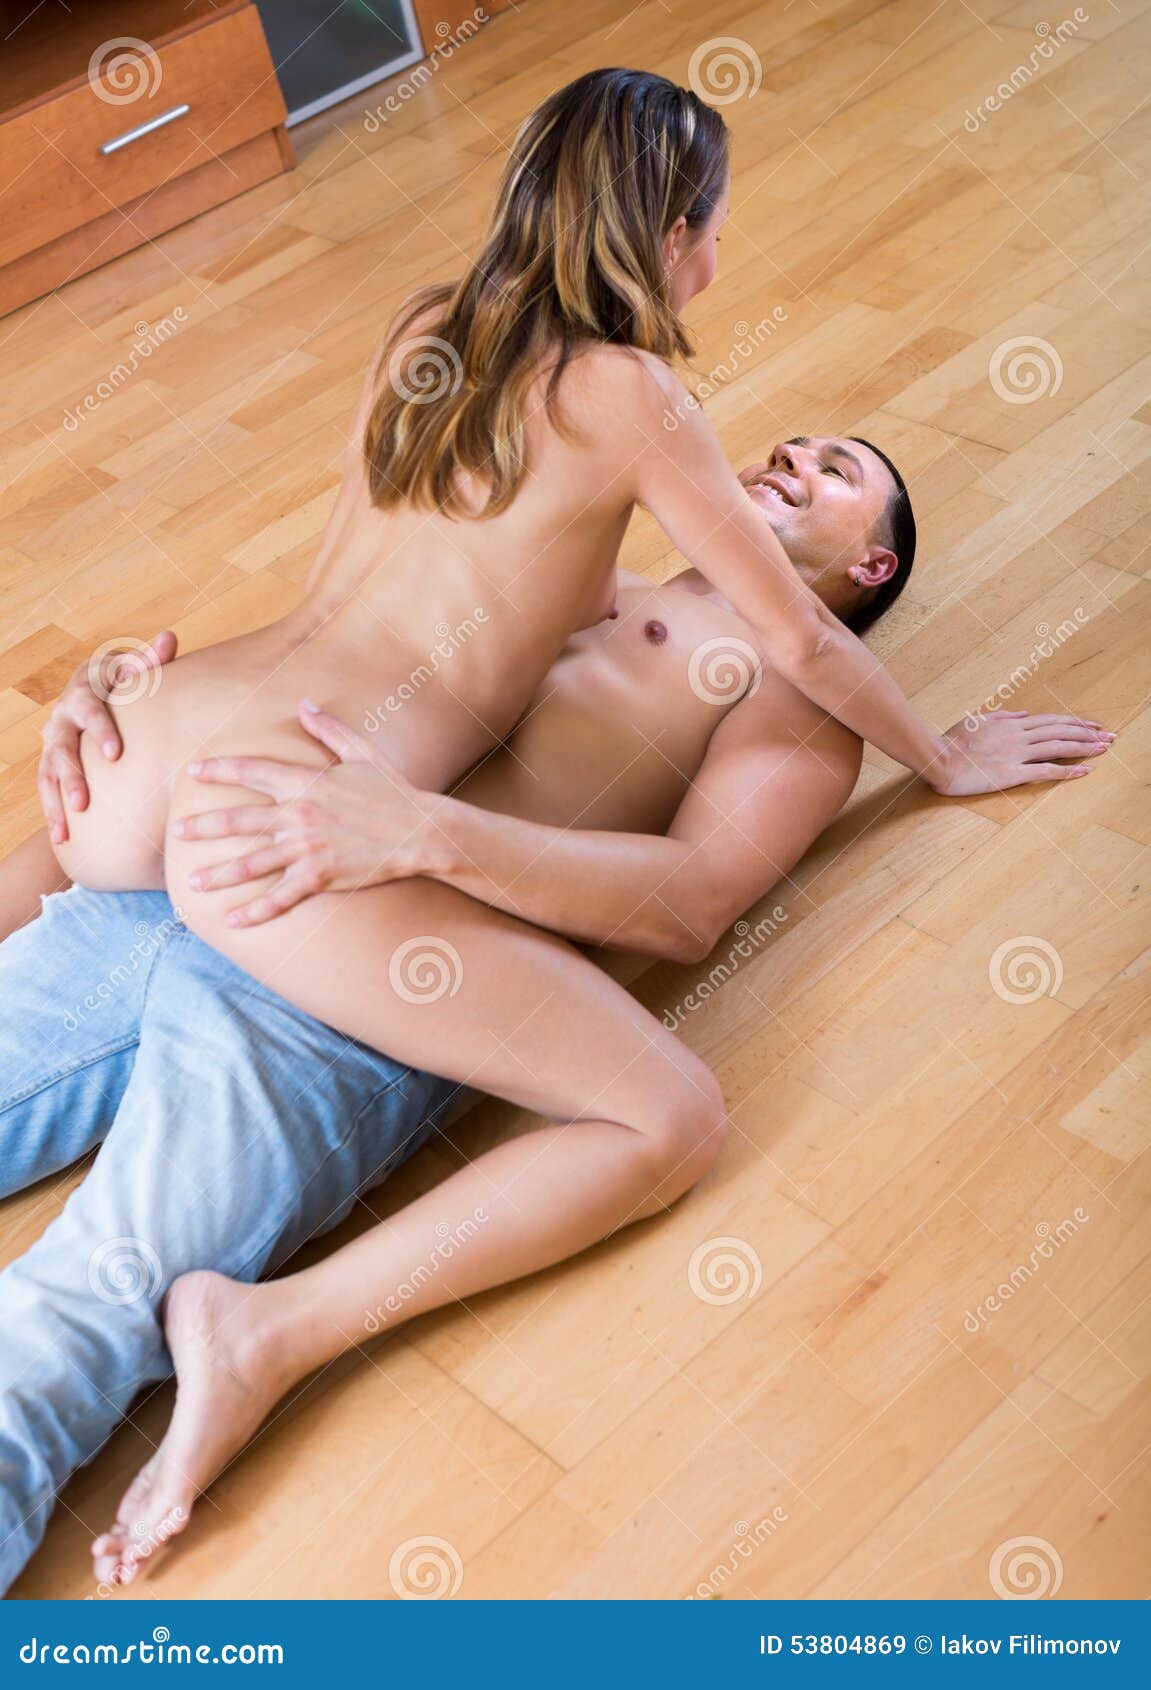 Woman and Man Making Love Indoor Stock Image hq picture